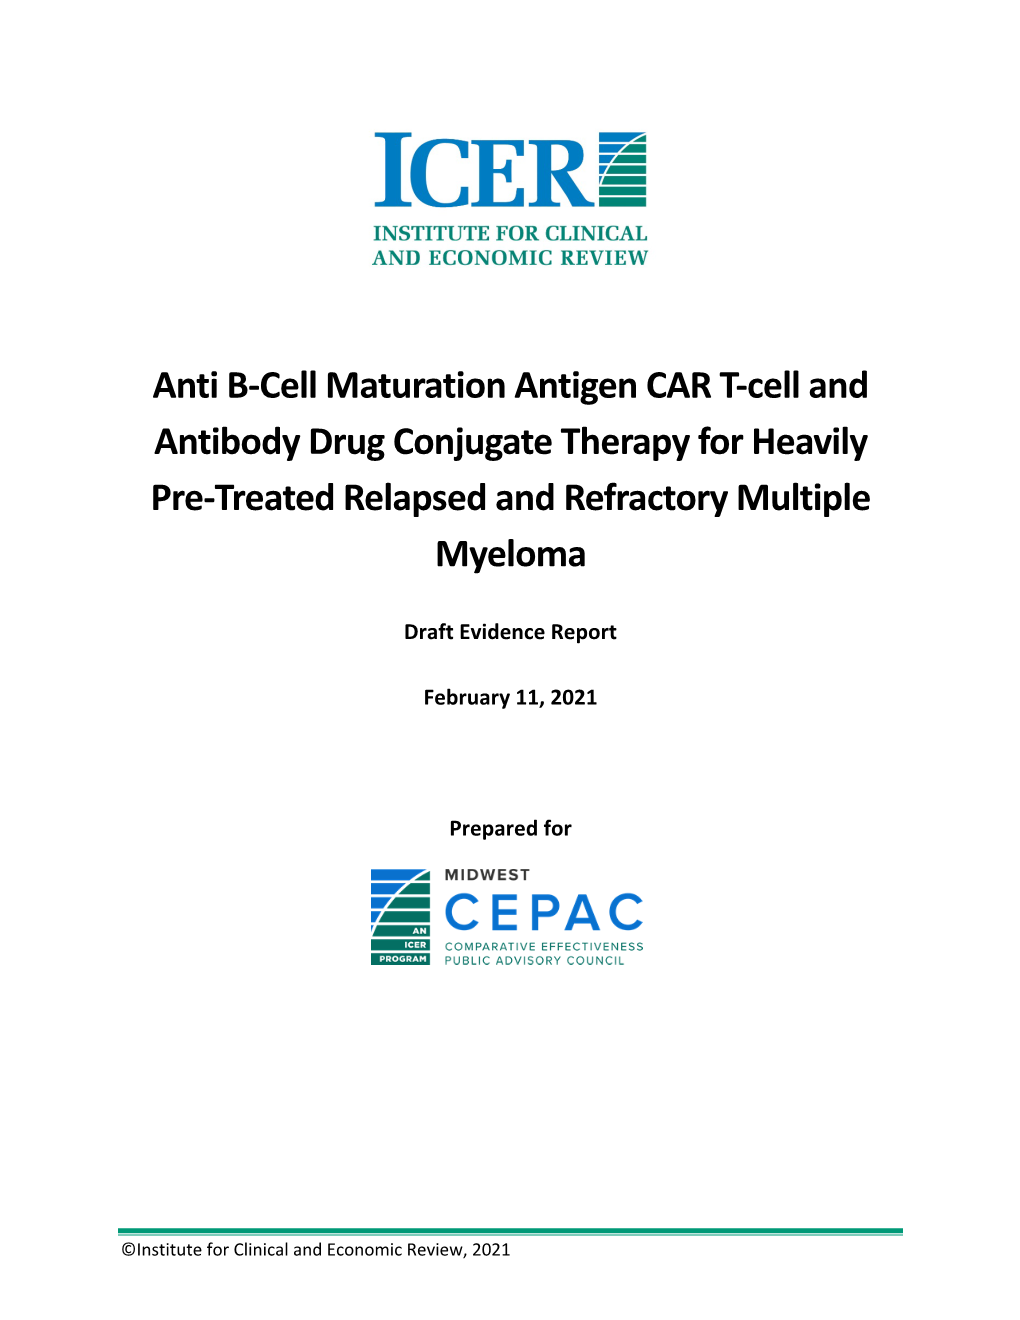 Anti B-Cell Maturation Antigen CAR T-Cell and Antibody Drug Conjugate Therapy for Heavily Pre-Treated Relapsed and Refractory Multiple Myeloma